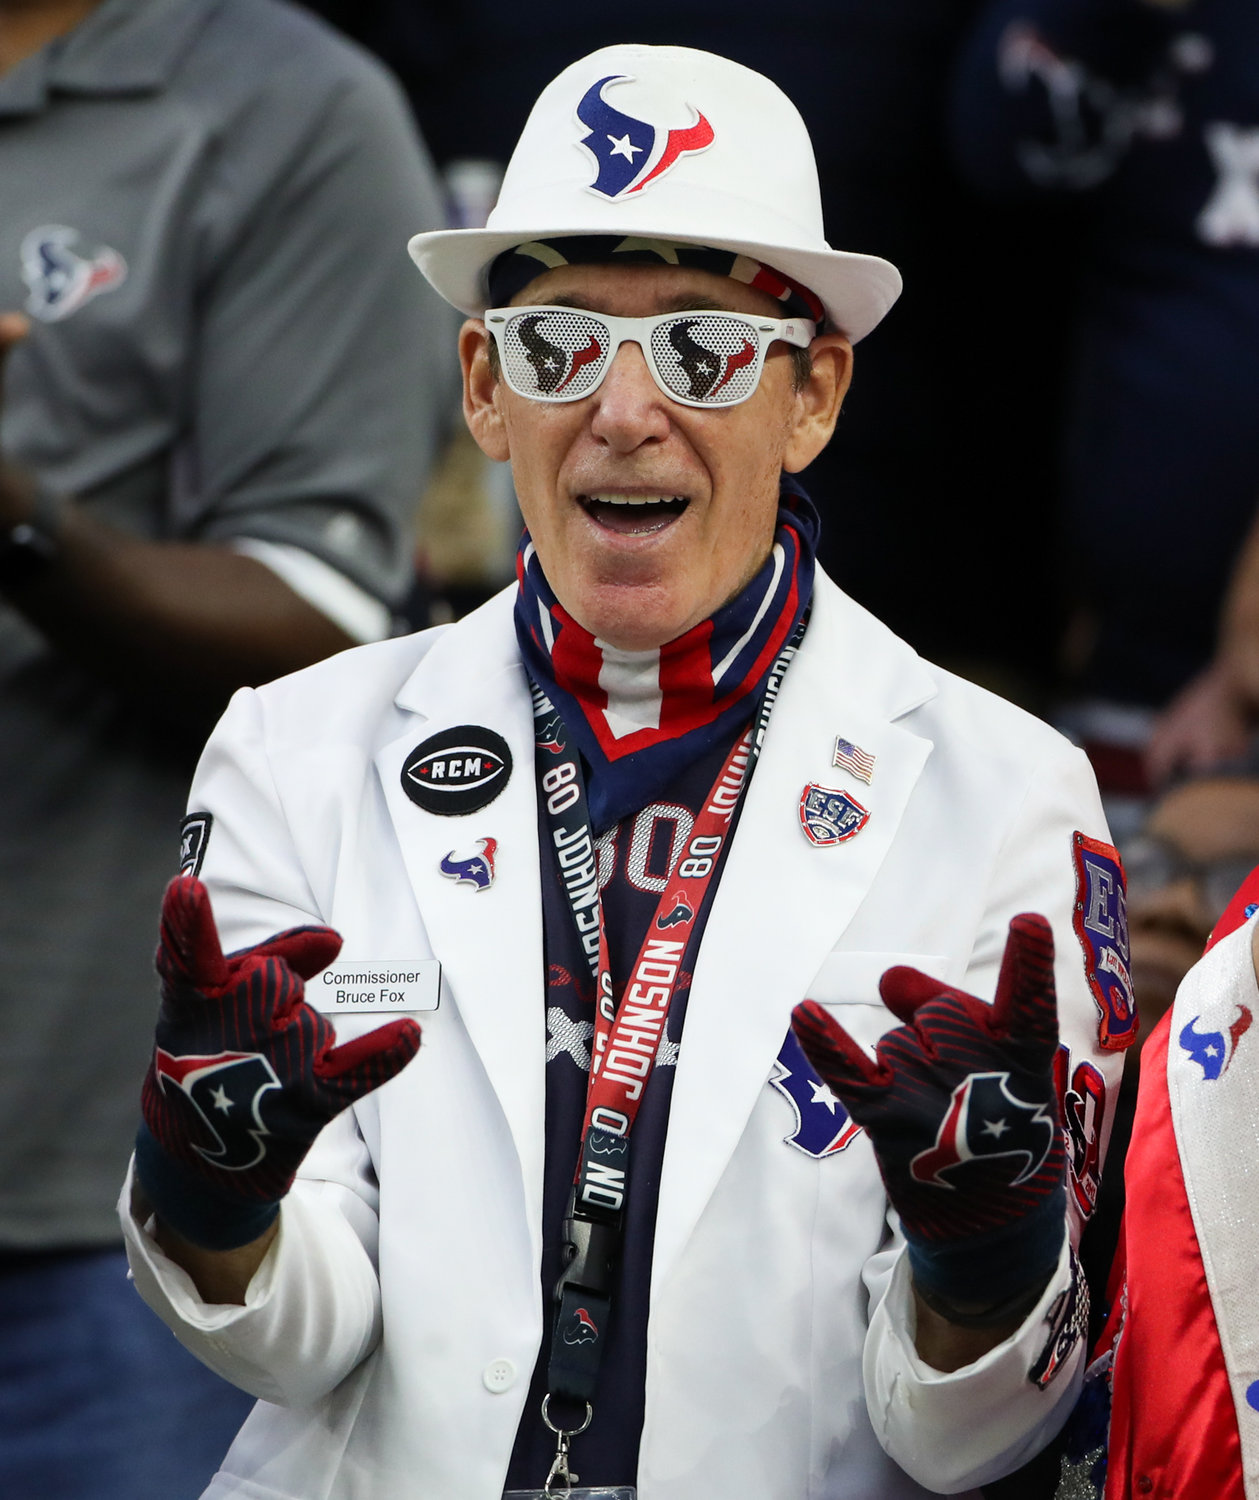 A Houston Texans fan during an NFL game between the Texans and the Titans on Jan. 9, 2022 in Houston, Texas.